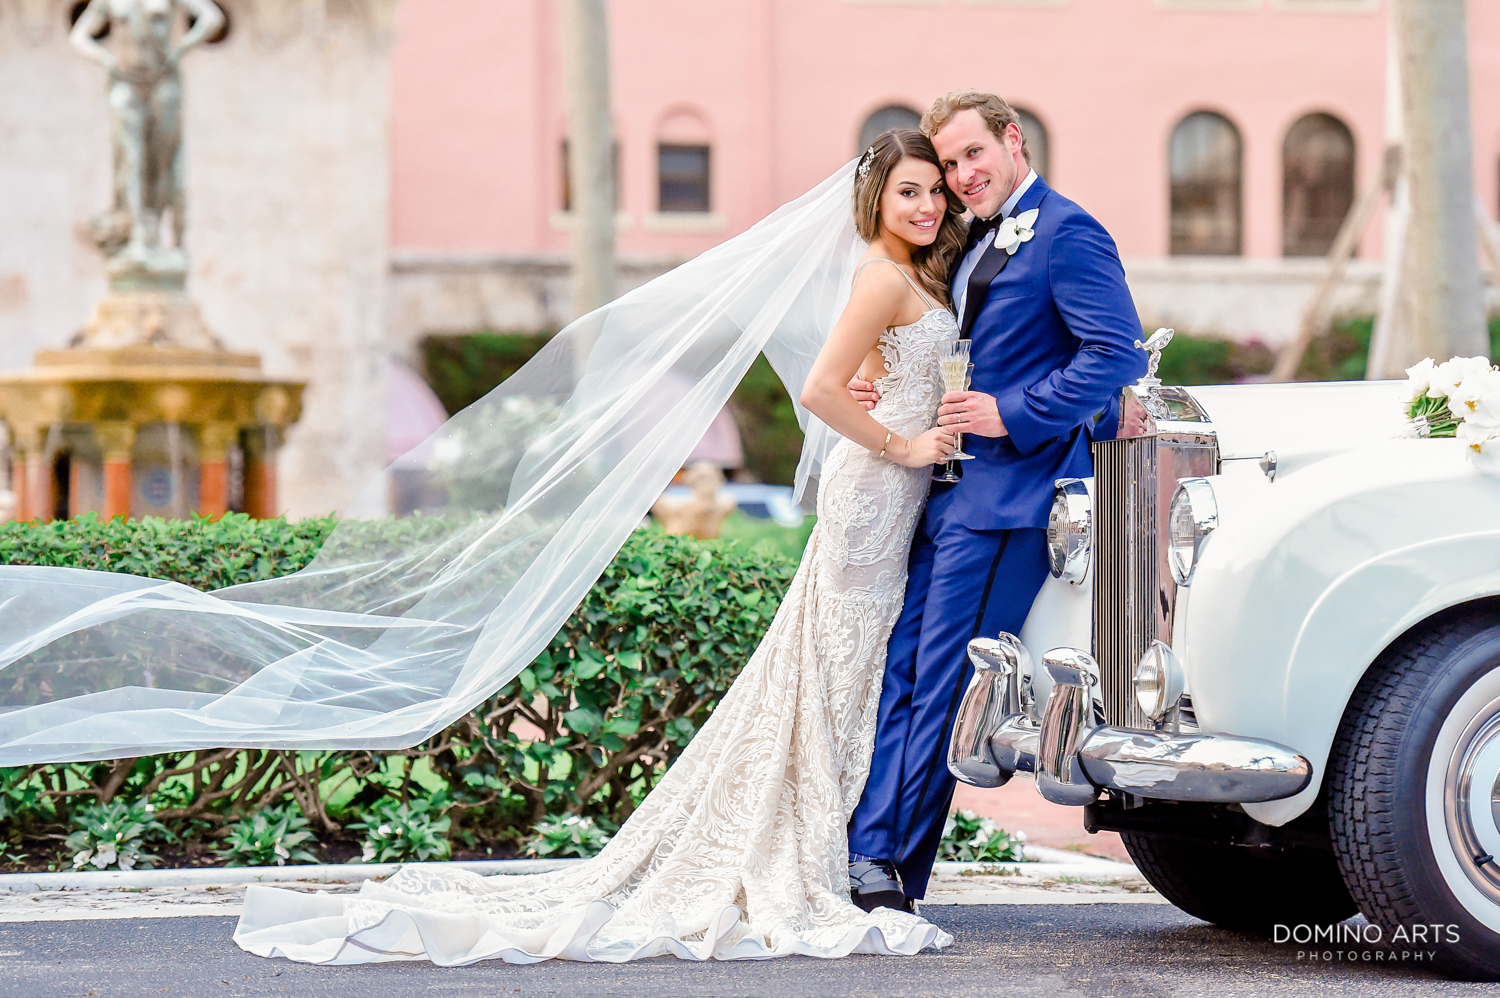 Artistic wedding picture of bride and groom at Boca Raton Resort